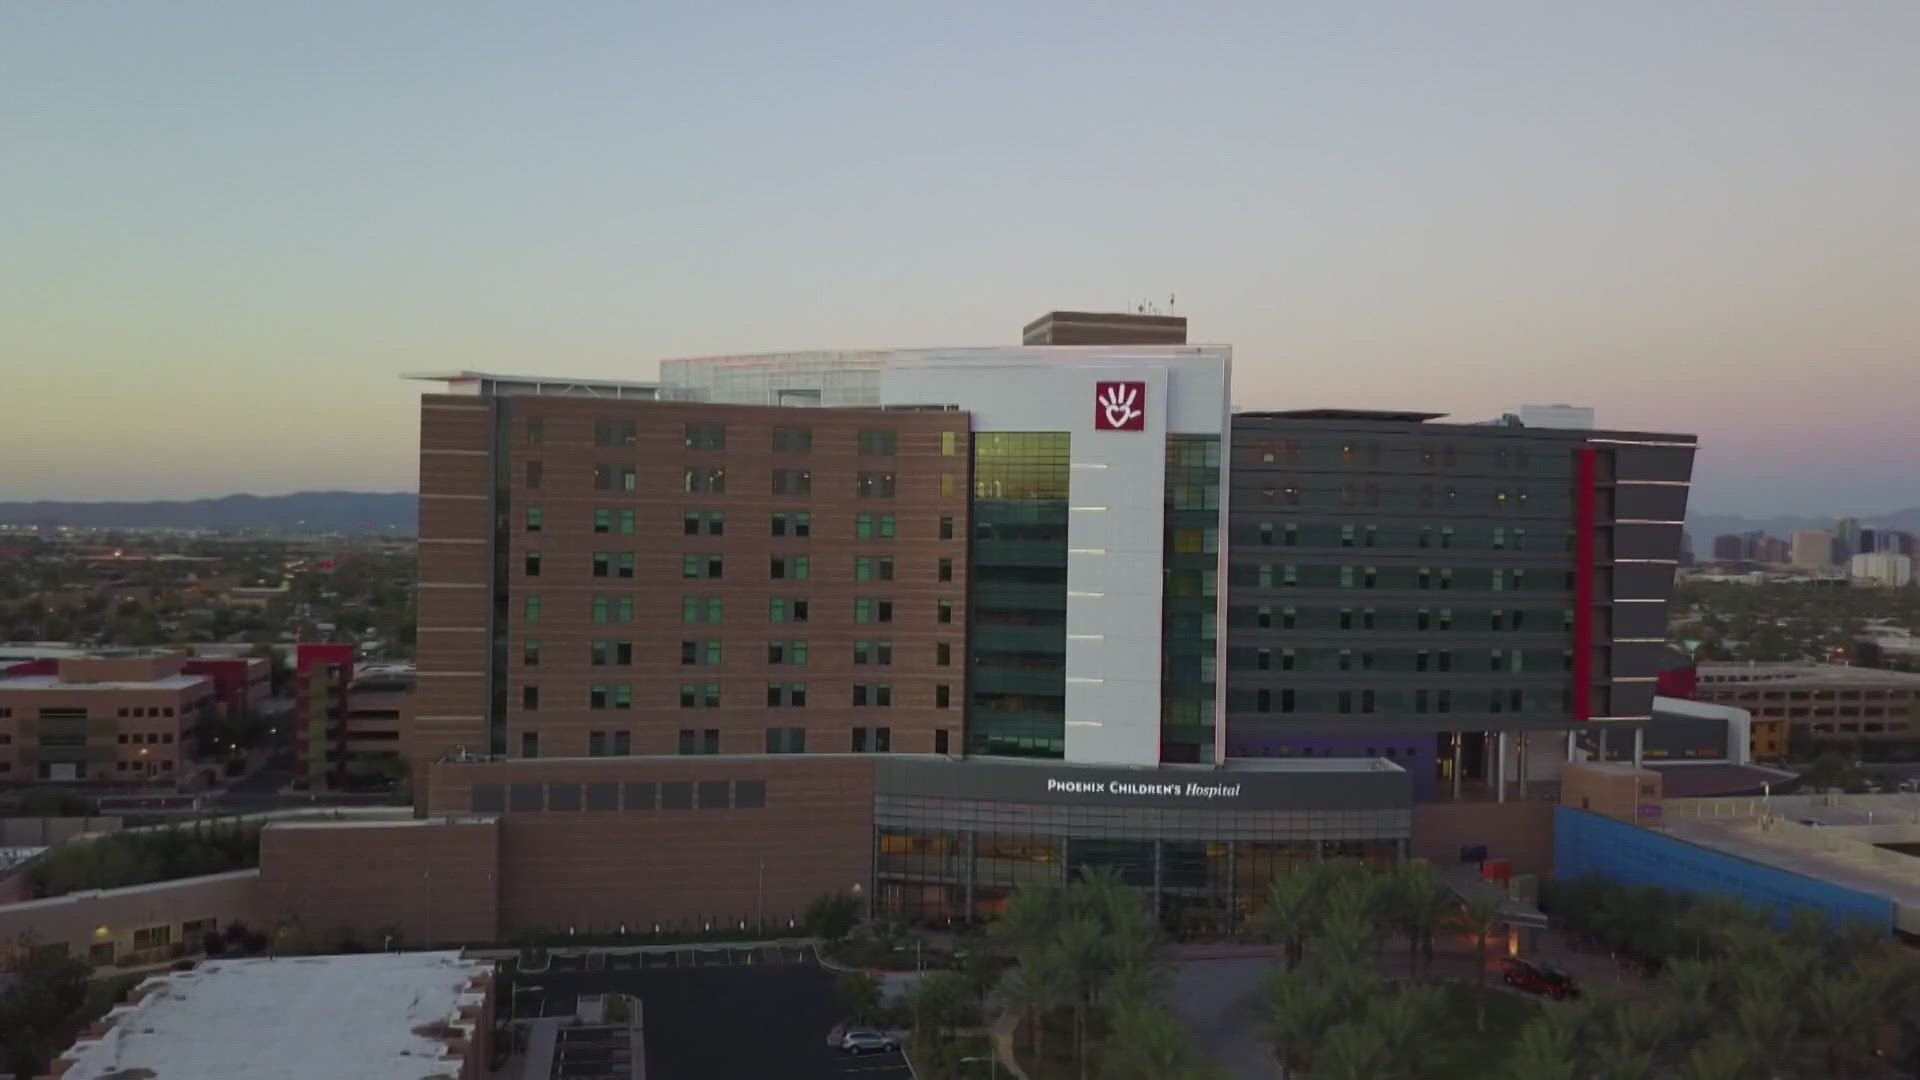 Contract deal to keep United Healthcare in-network for patients at Phoenix Children's Hospital was unable to be reached by the deadline.